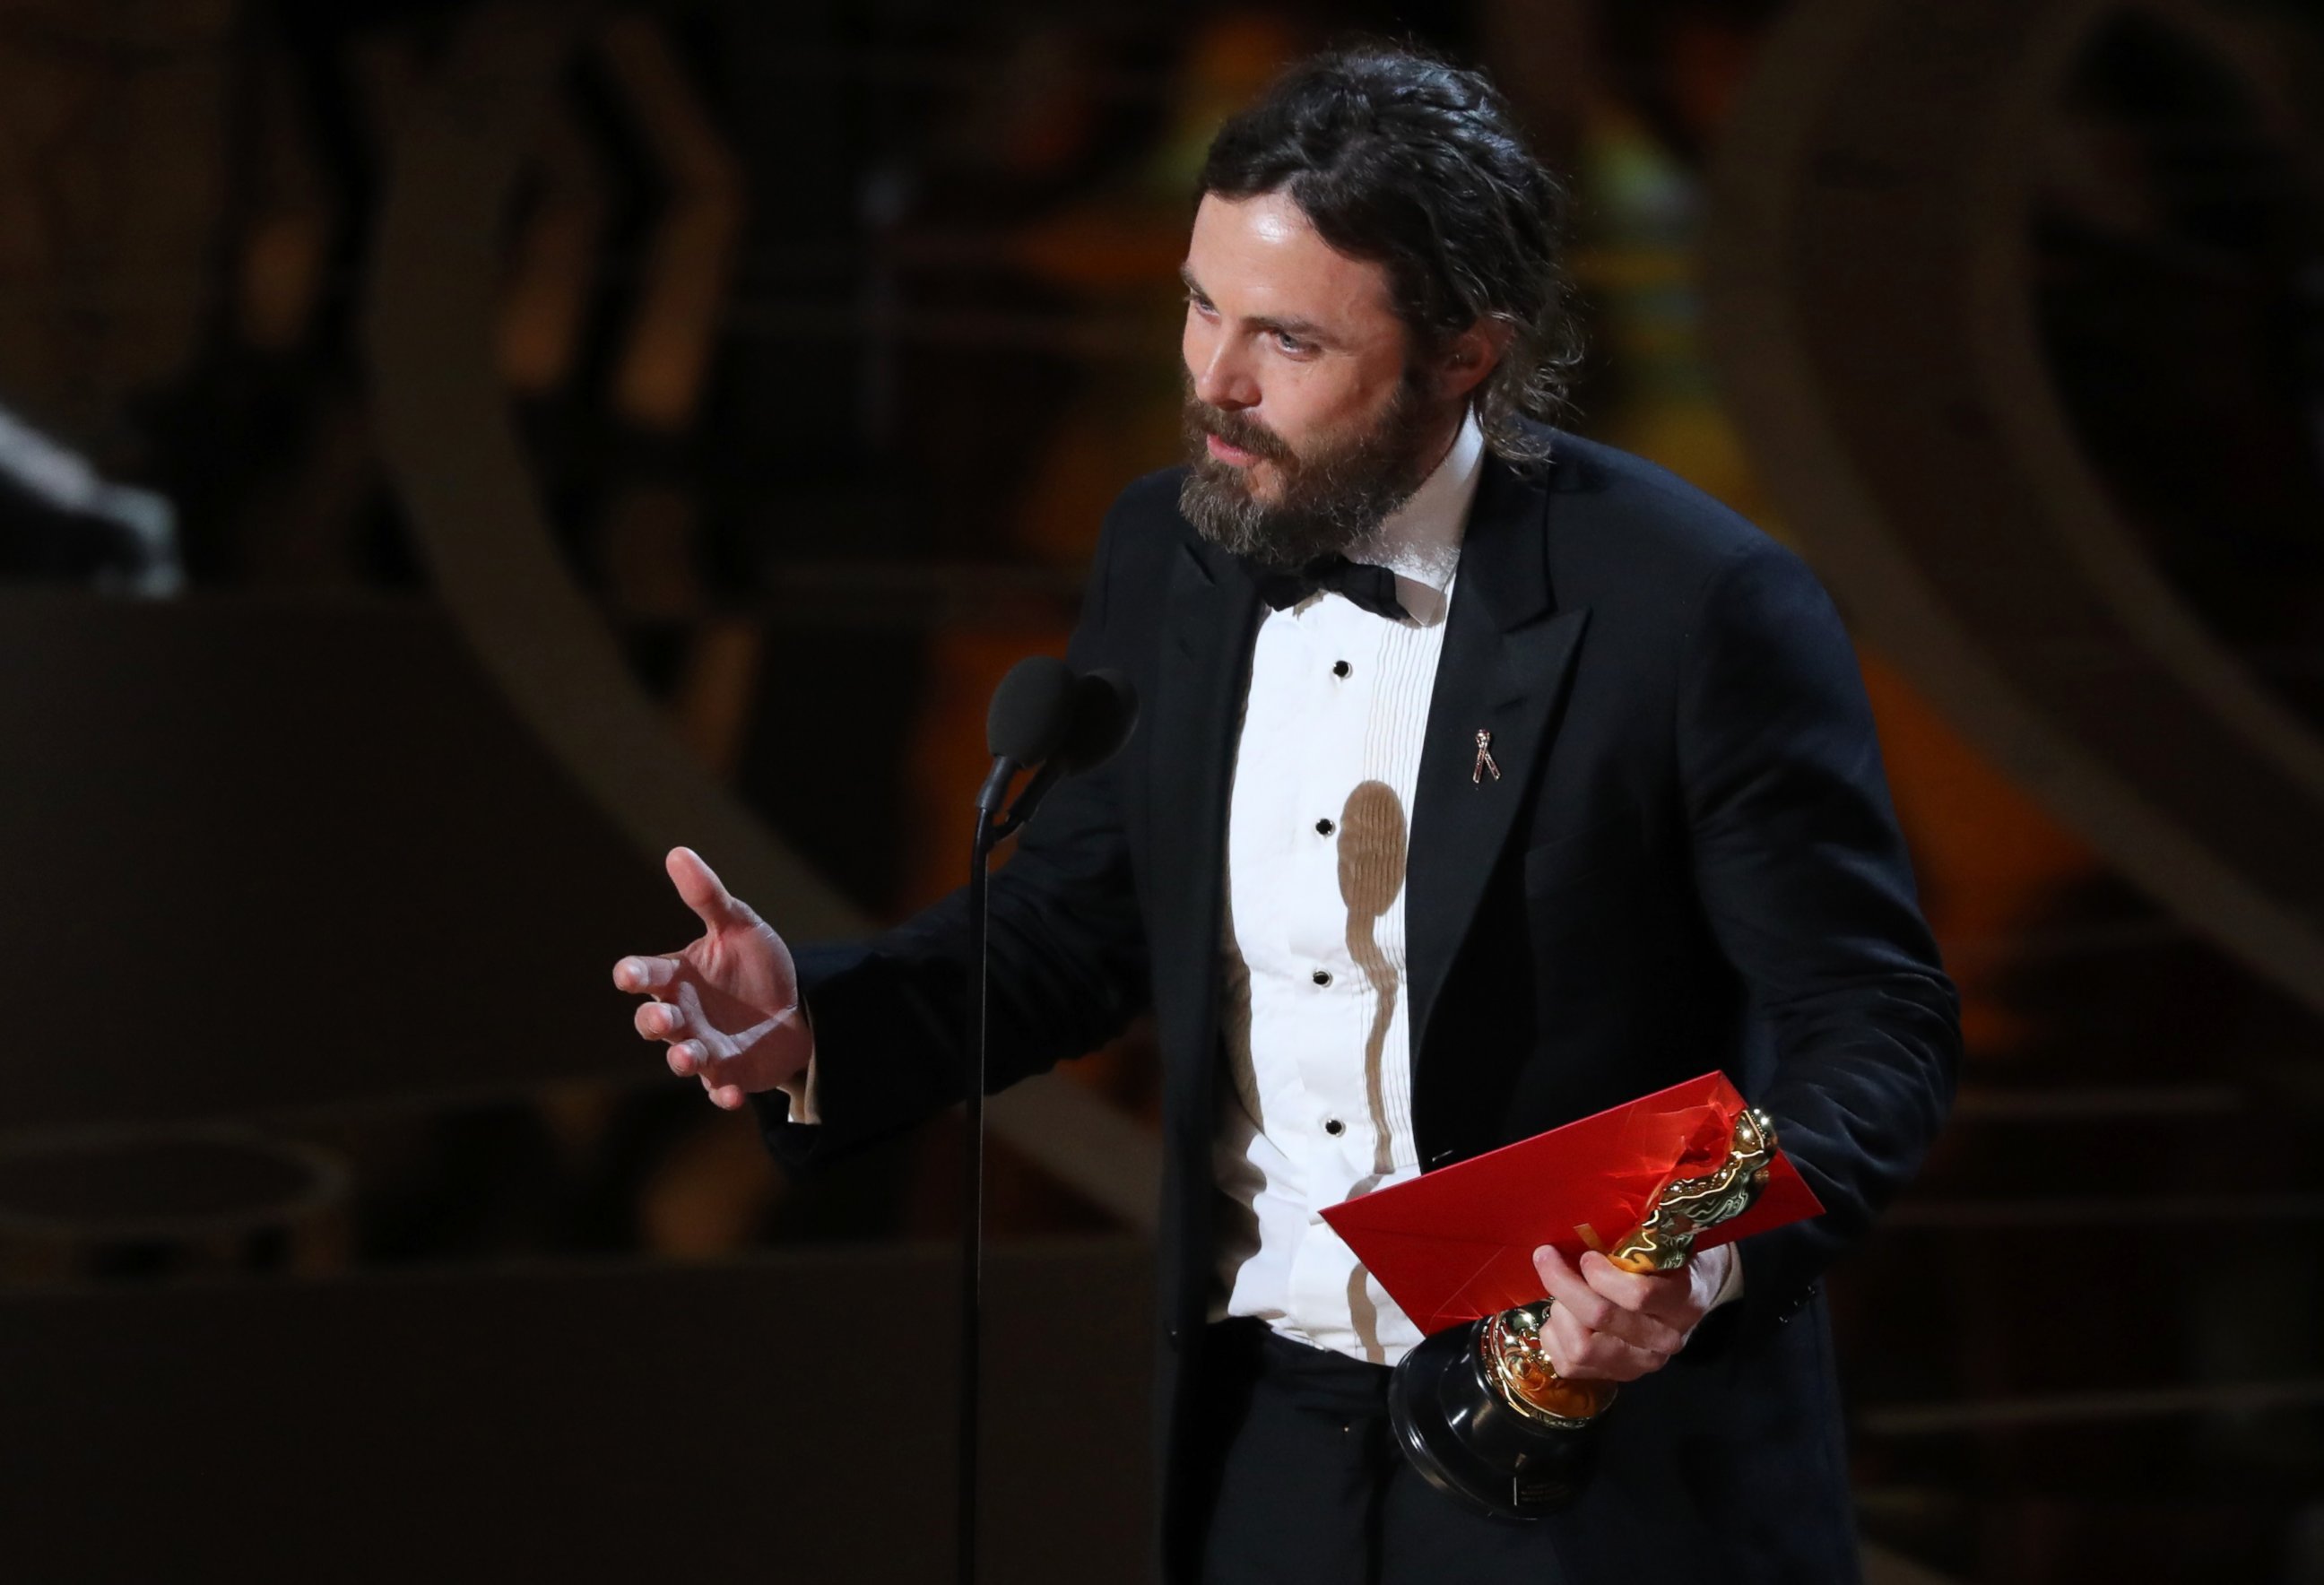 PHOTO: Casey Affleck speaks as he accepts the Oscar for Best Actor for "Manchester by the Sea."